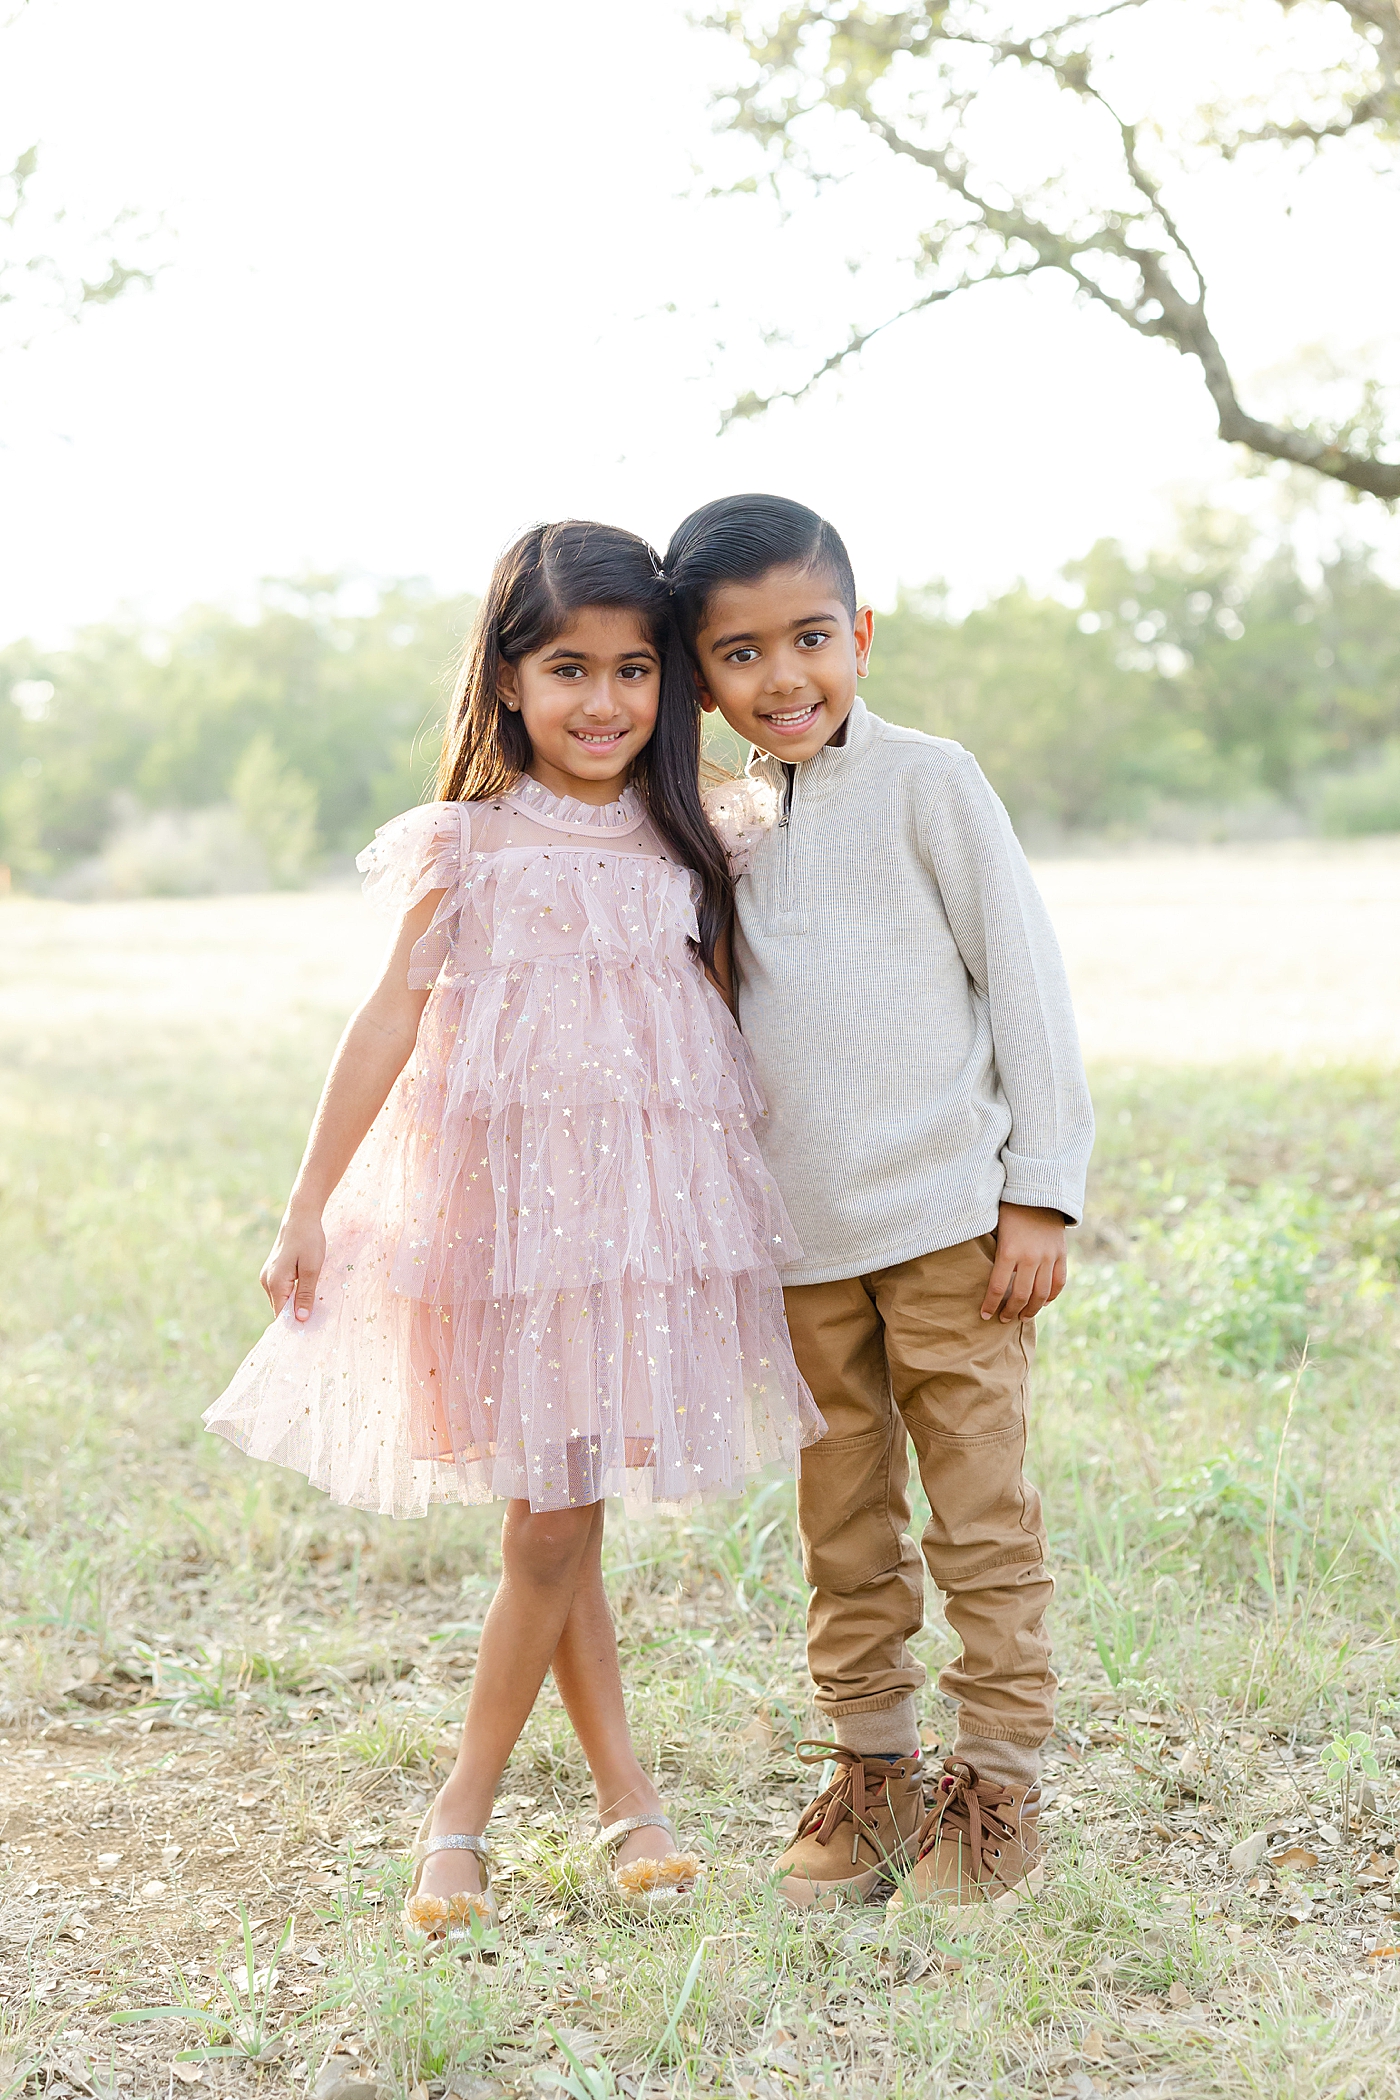 Little boy and girl siblings in the park | Image by Sana Ahmed Photography